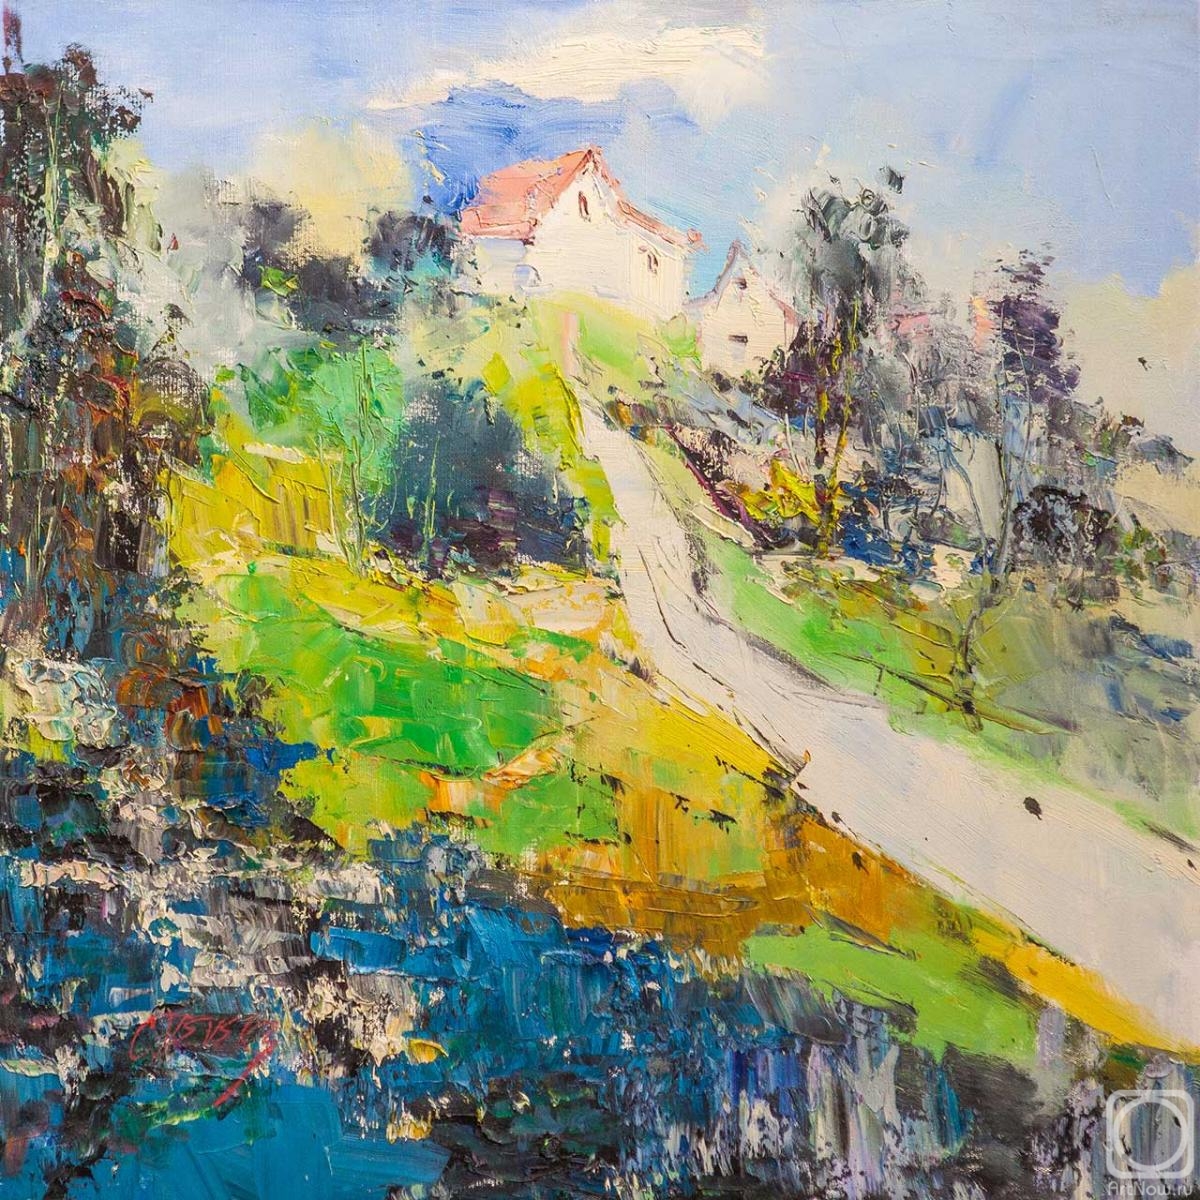 Vevers Christina. Blooming Mediterranean. Houses on the hill N2